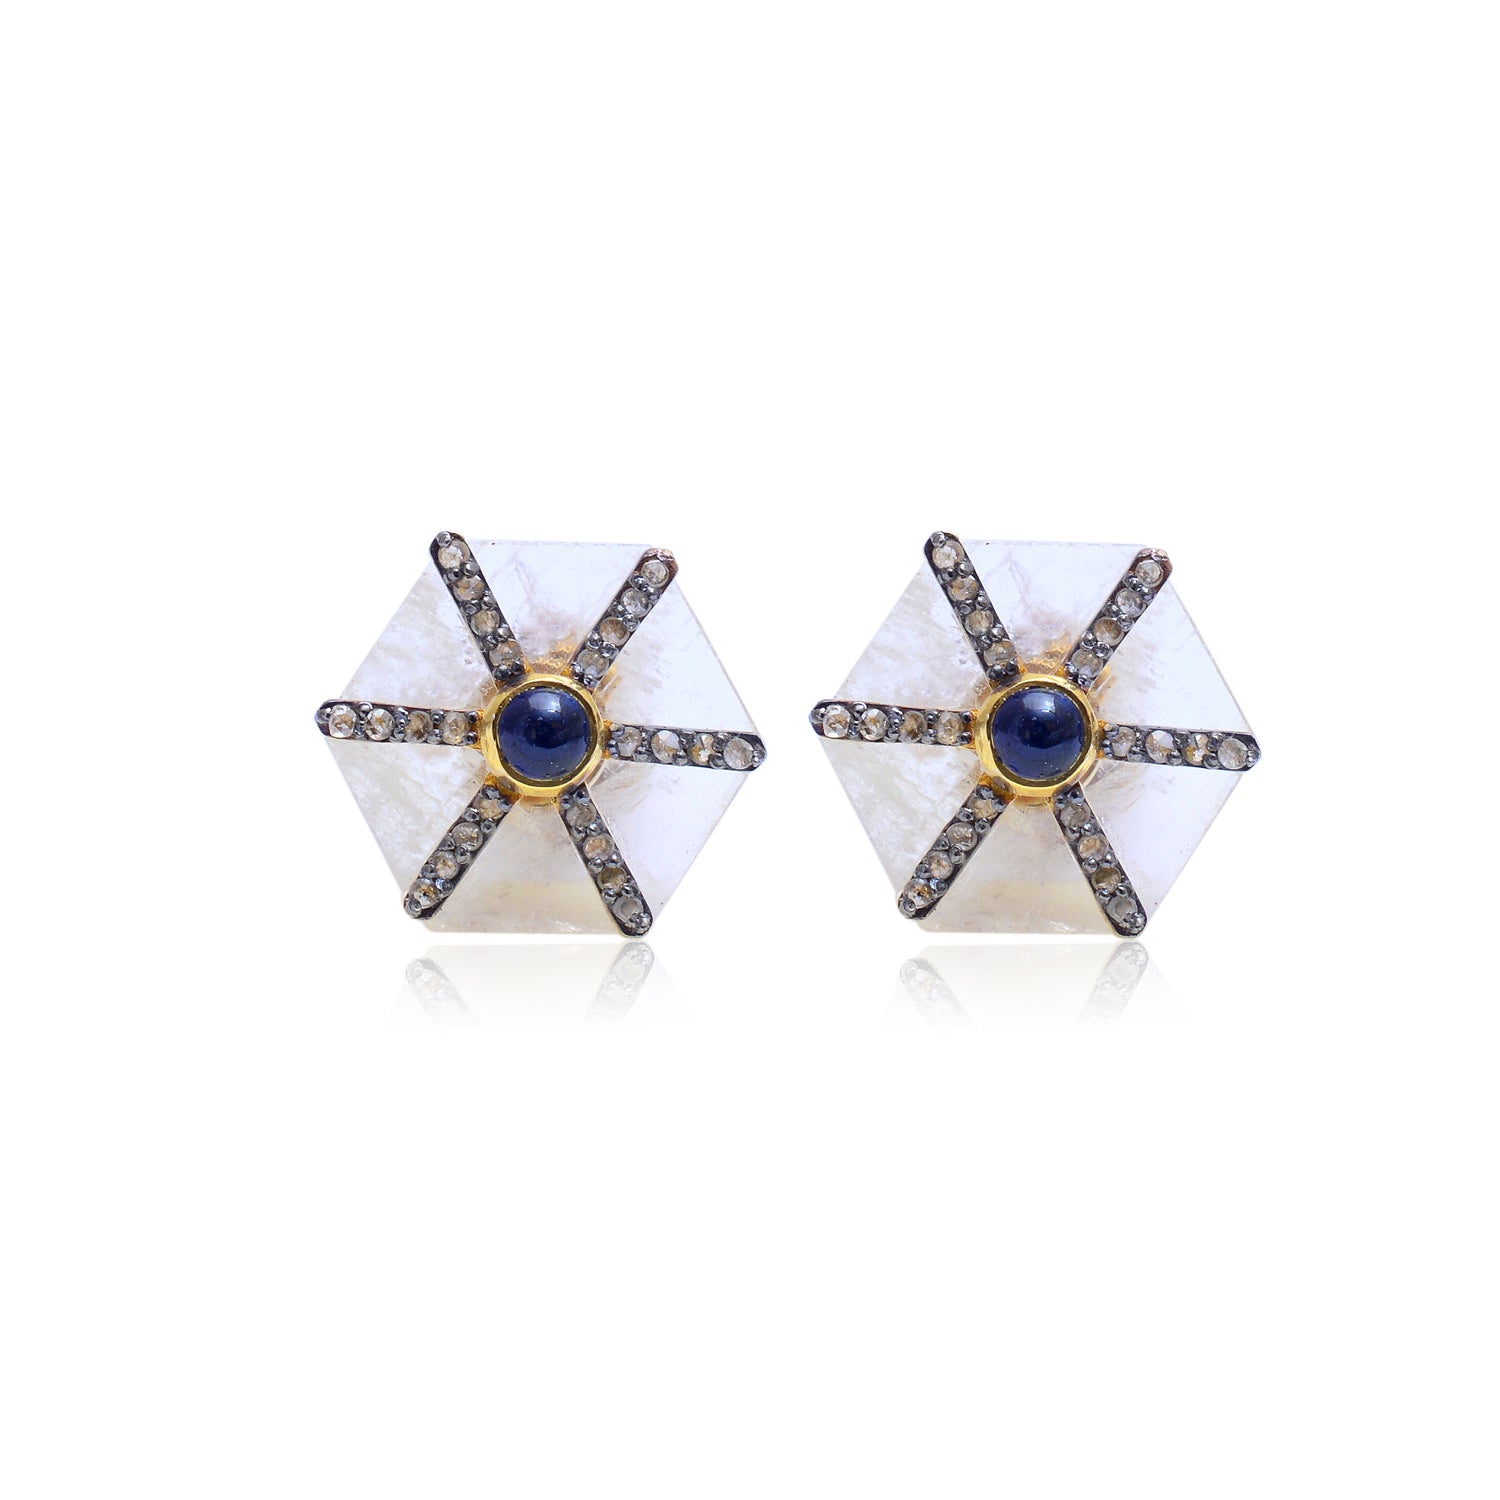 925 Silver Diamond Cufflinks with Sapphire and Moonstone